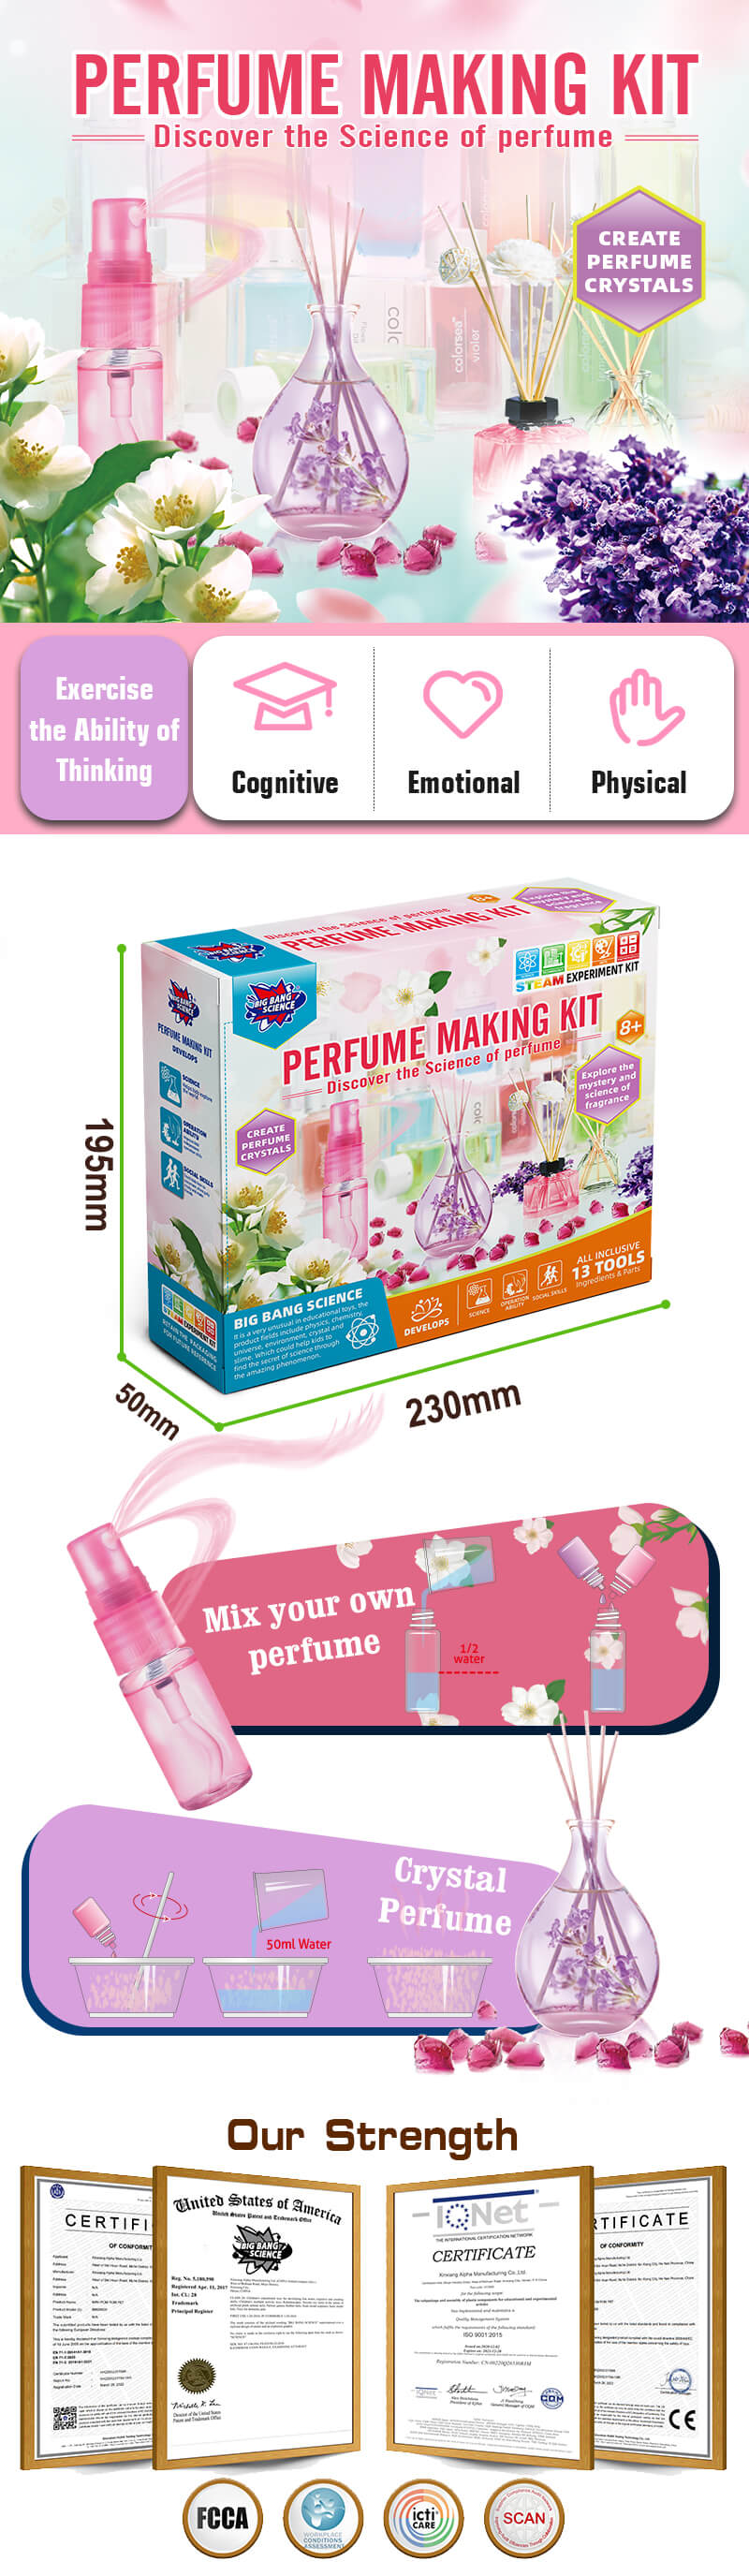 Discover-The-Science-Of-Perfume-Kit-Product-detail-map